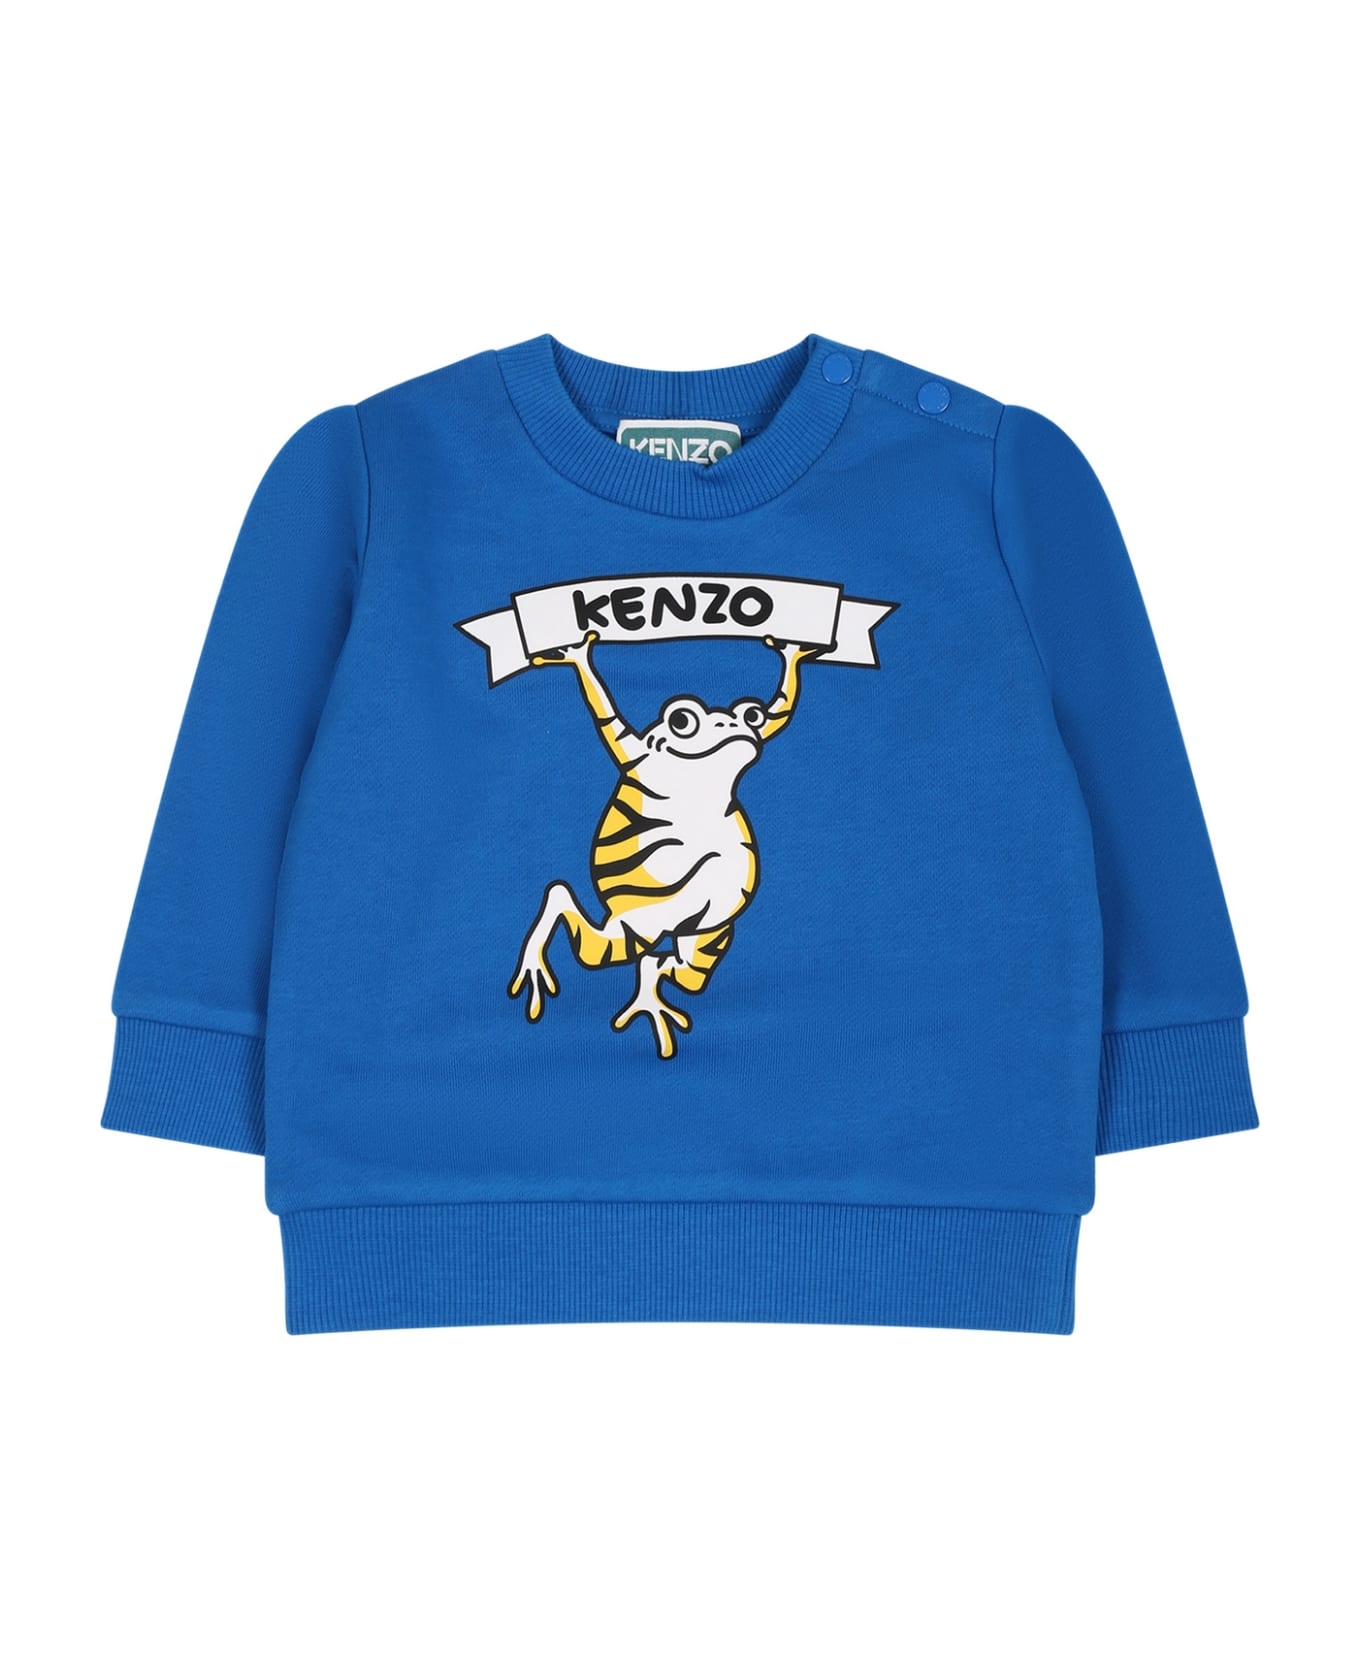 Kenzo Kids Light Blue T-shirt For Baby Boy With Logo And Print - Light Blue